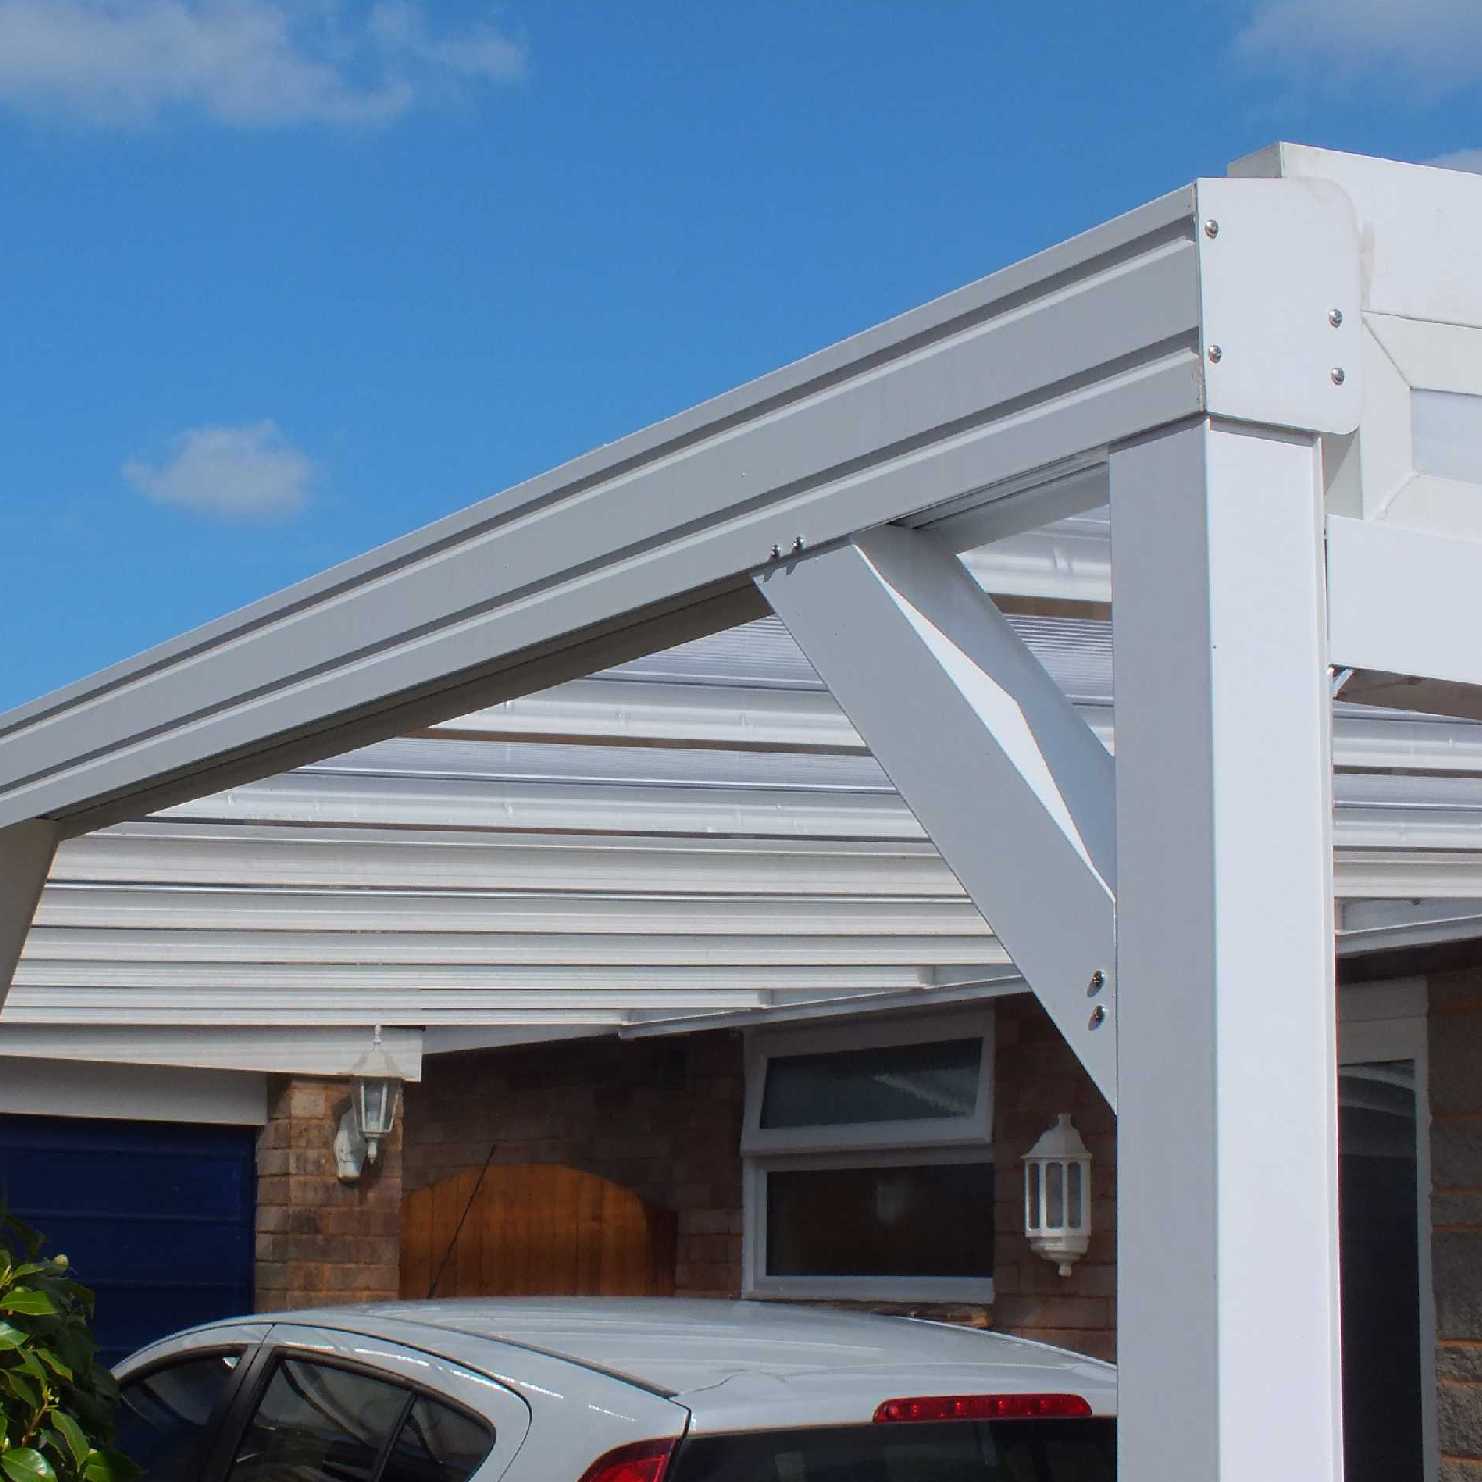 Buy Omega Smart Lean-To Canopy, White with 16mm Polycarbonate Glazing - 6.3m (W) x 3.0m (P), (4) Supporting Posts online today